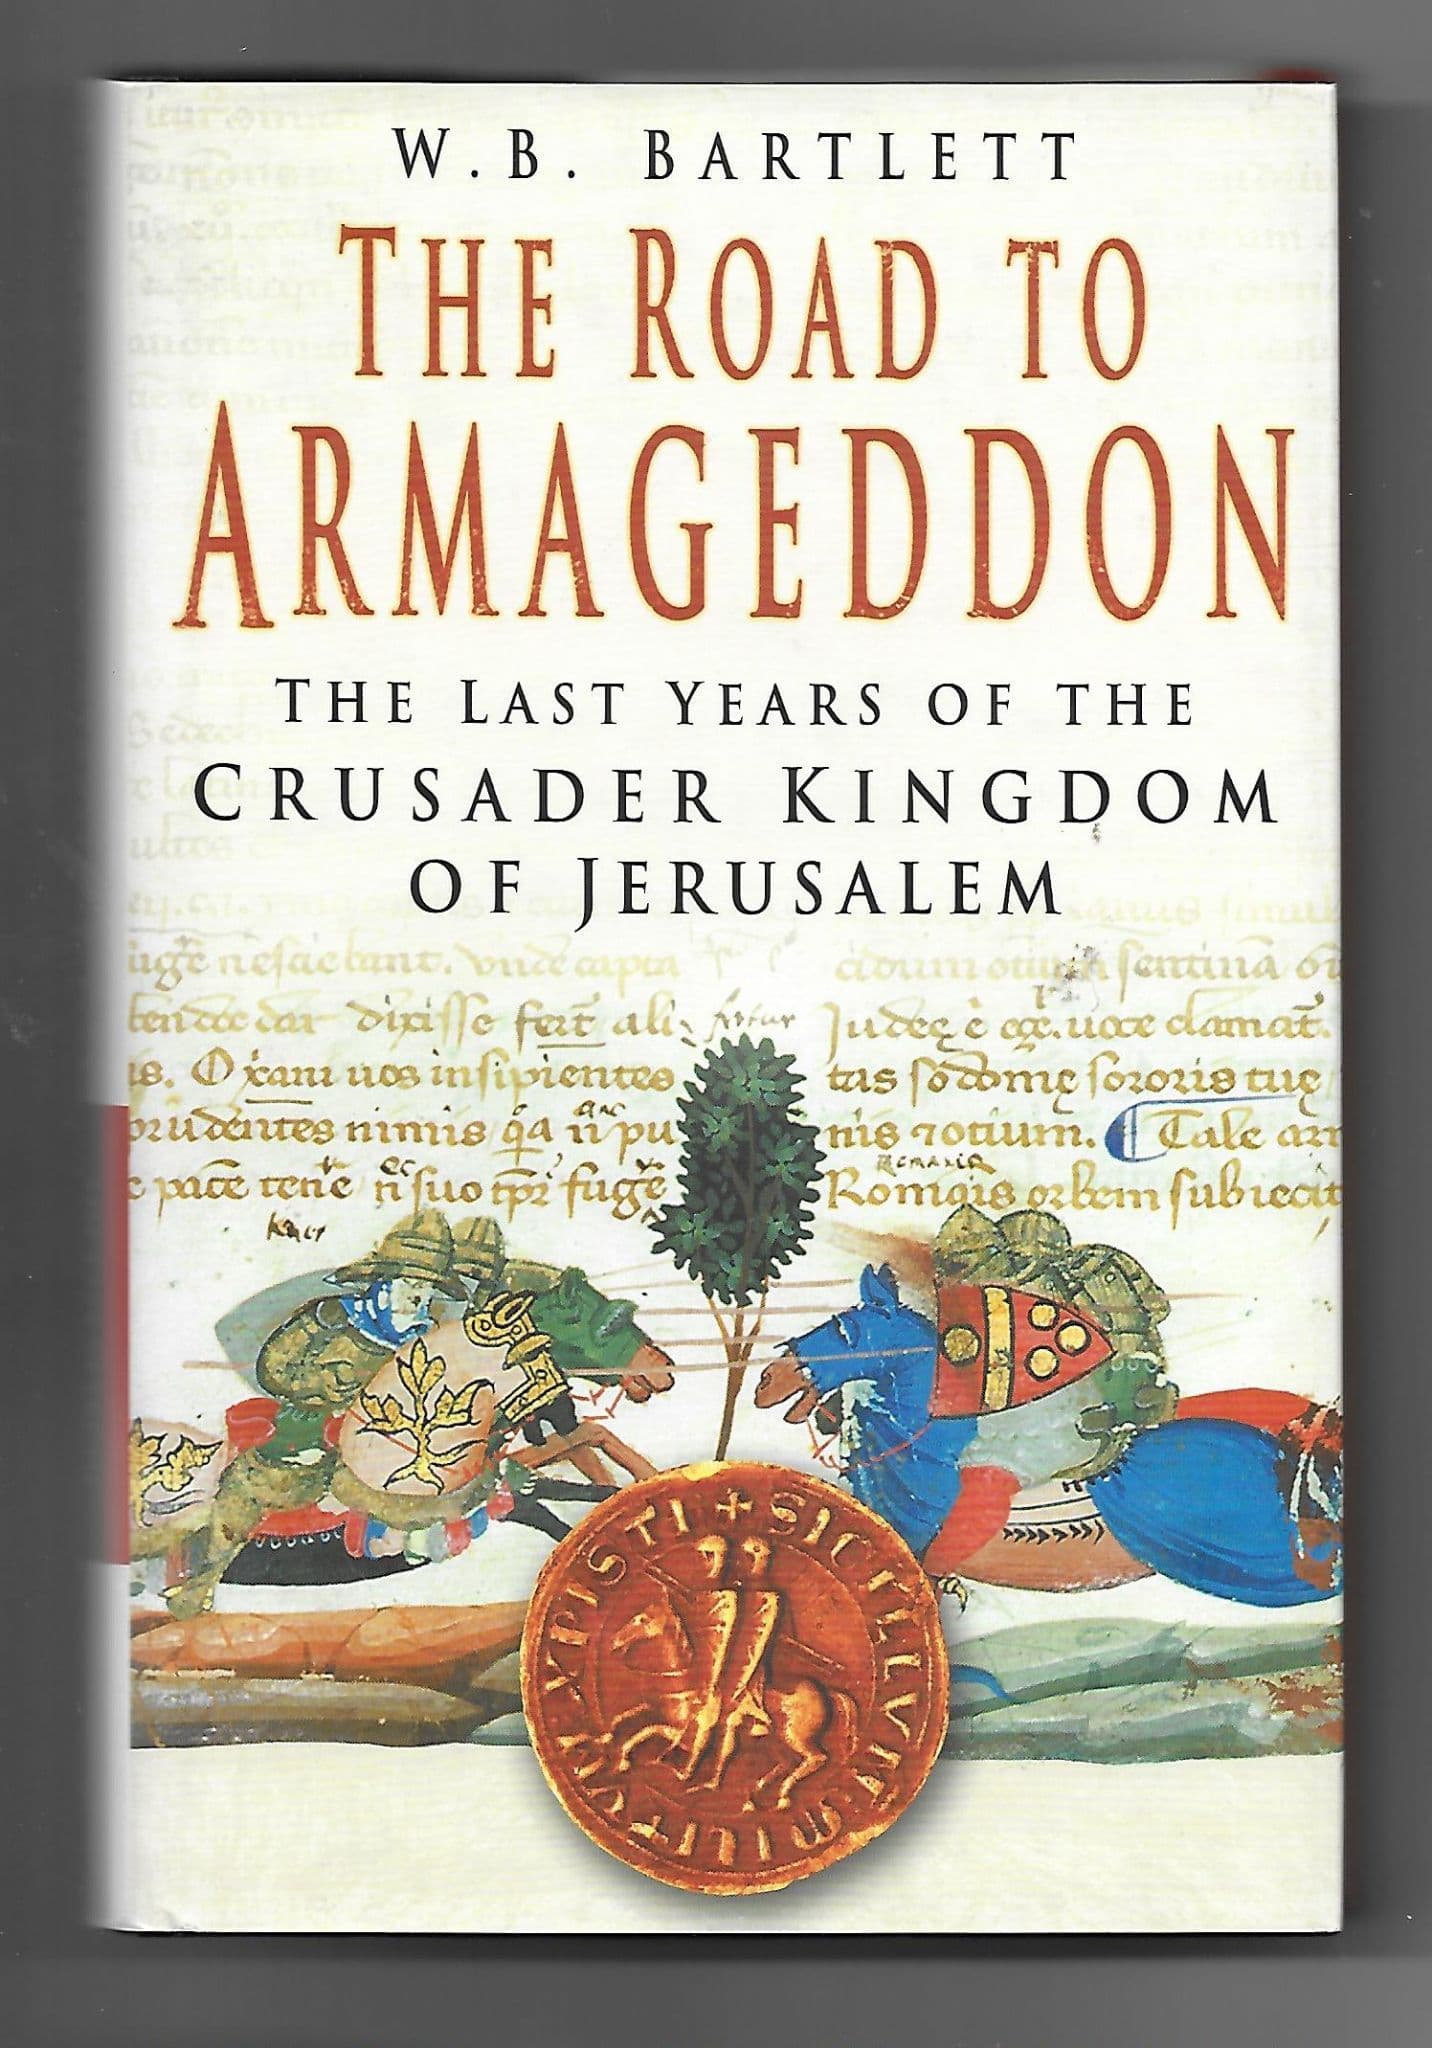 The Road to Armageddon: The Last Years of the Crusader Kingdom of Jerusalem